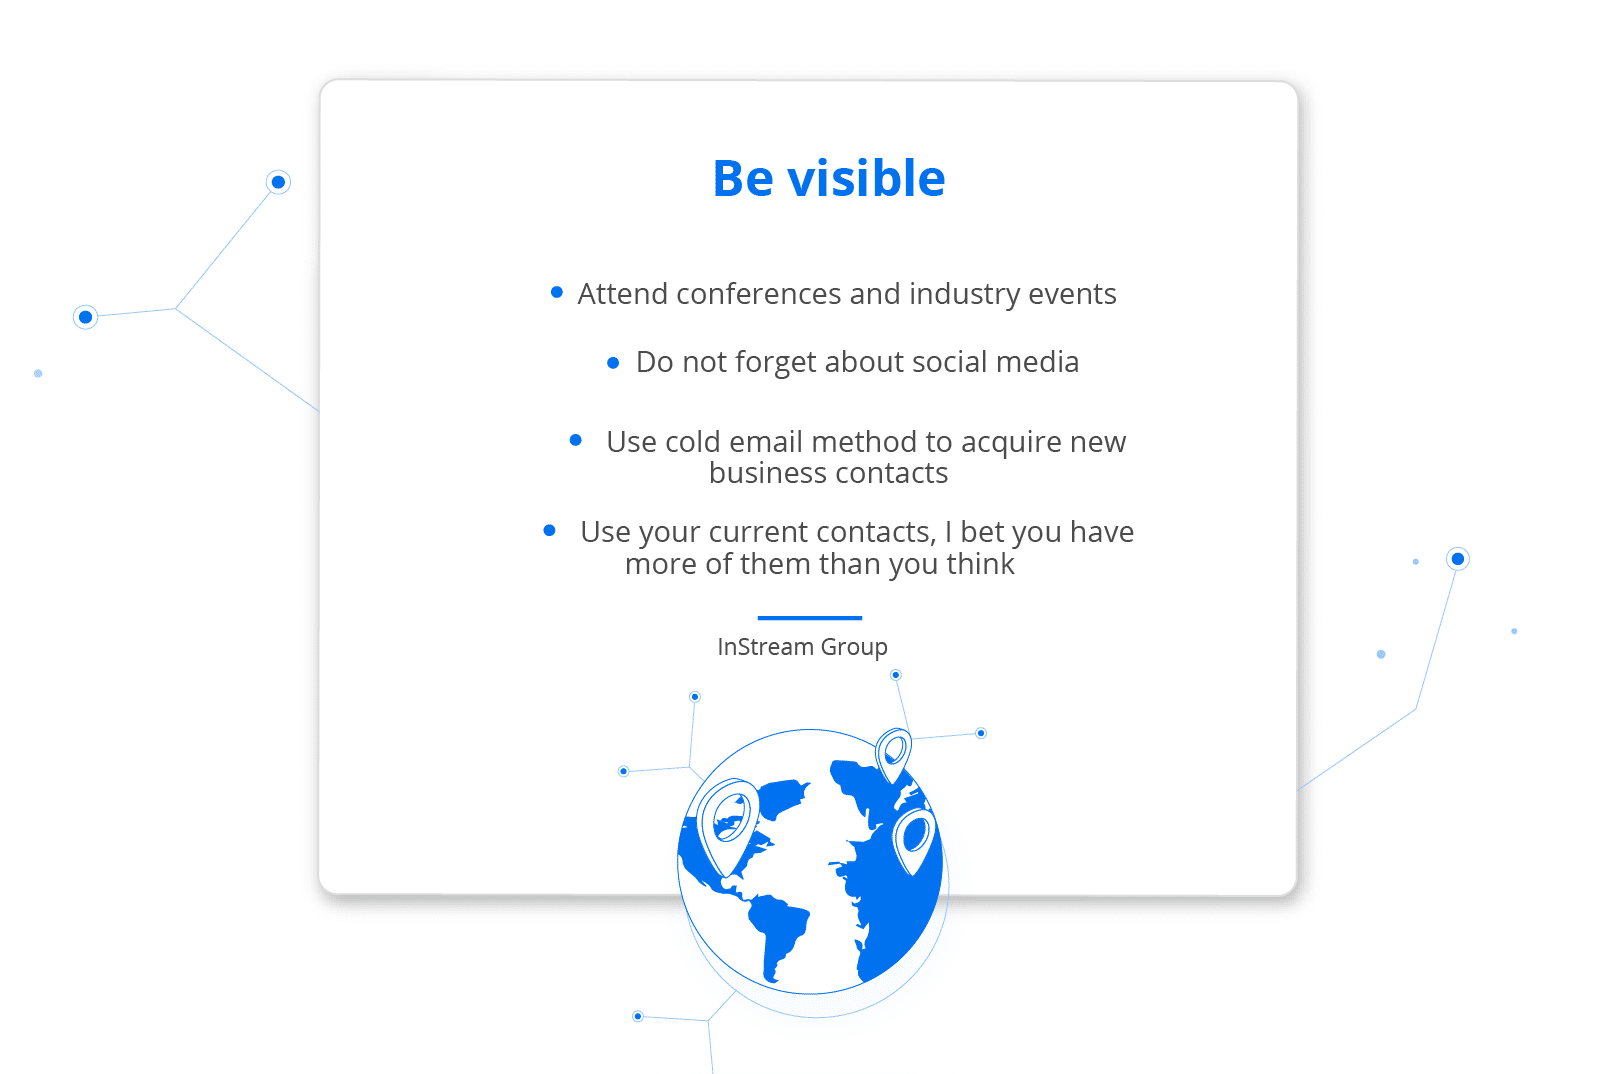 How to become more visible?